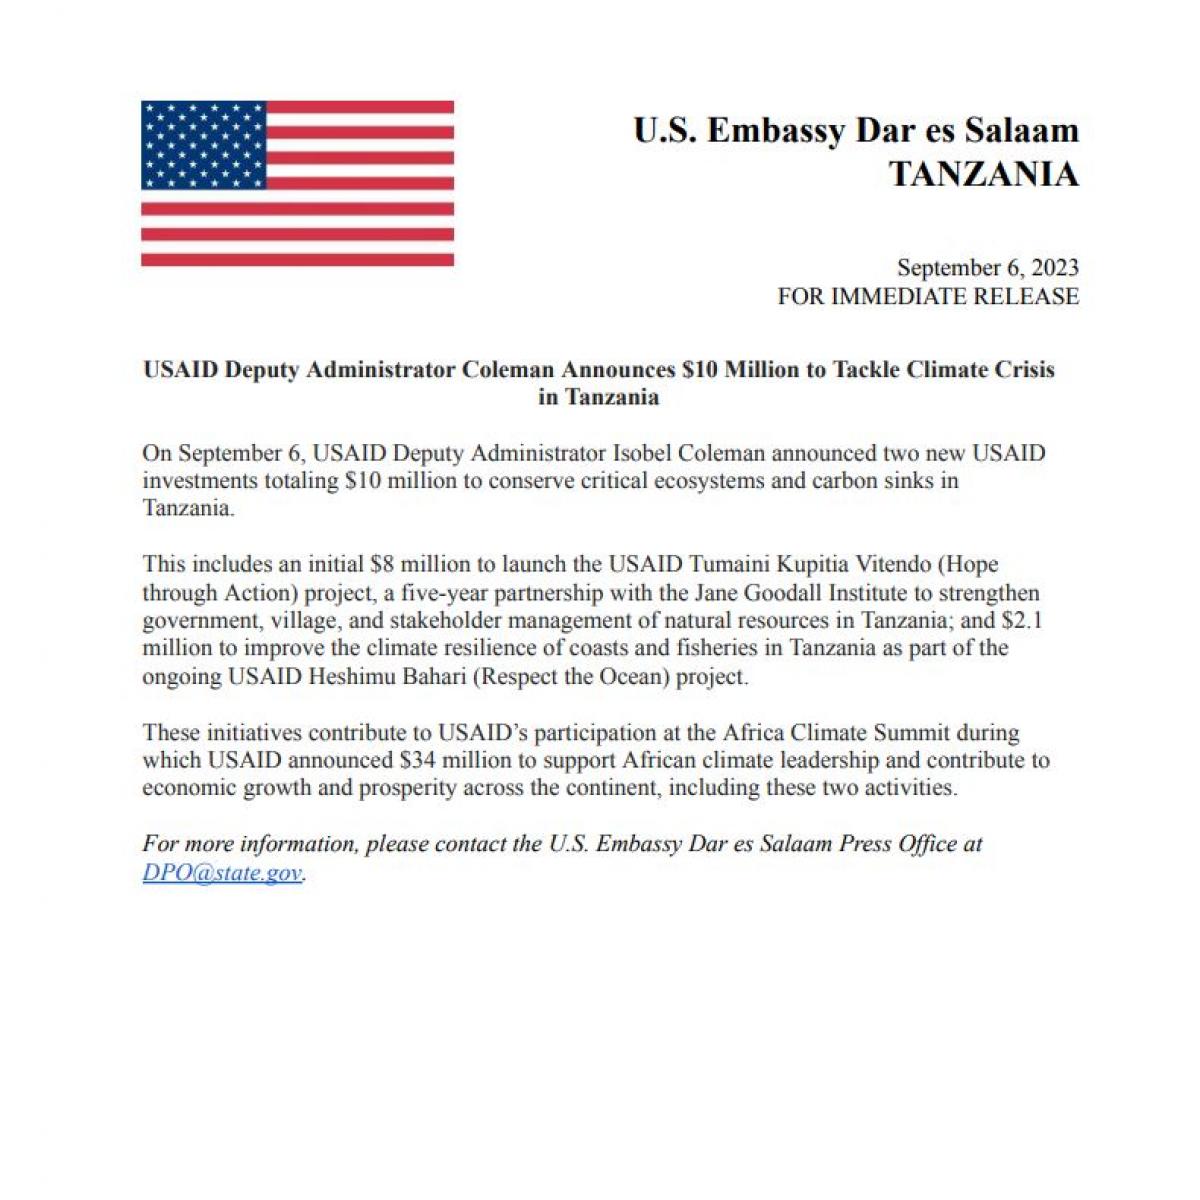 USAID Deputy Administrator Coleman Announces $10 Million to Tackle Climate Crisis in Tanzania